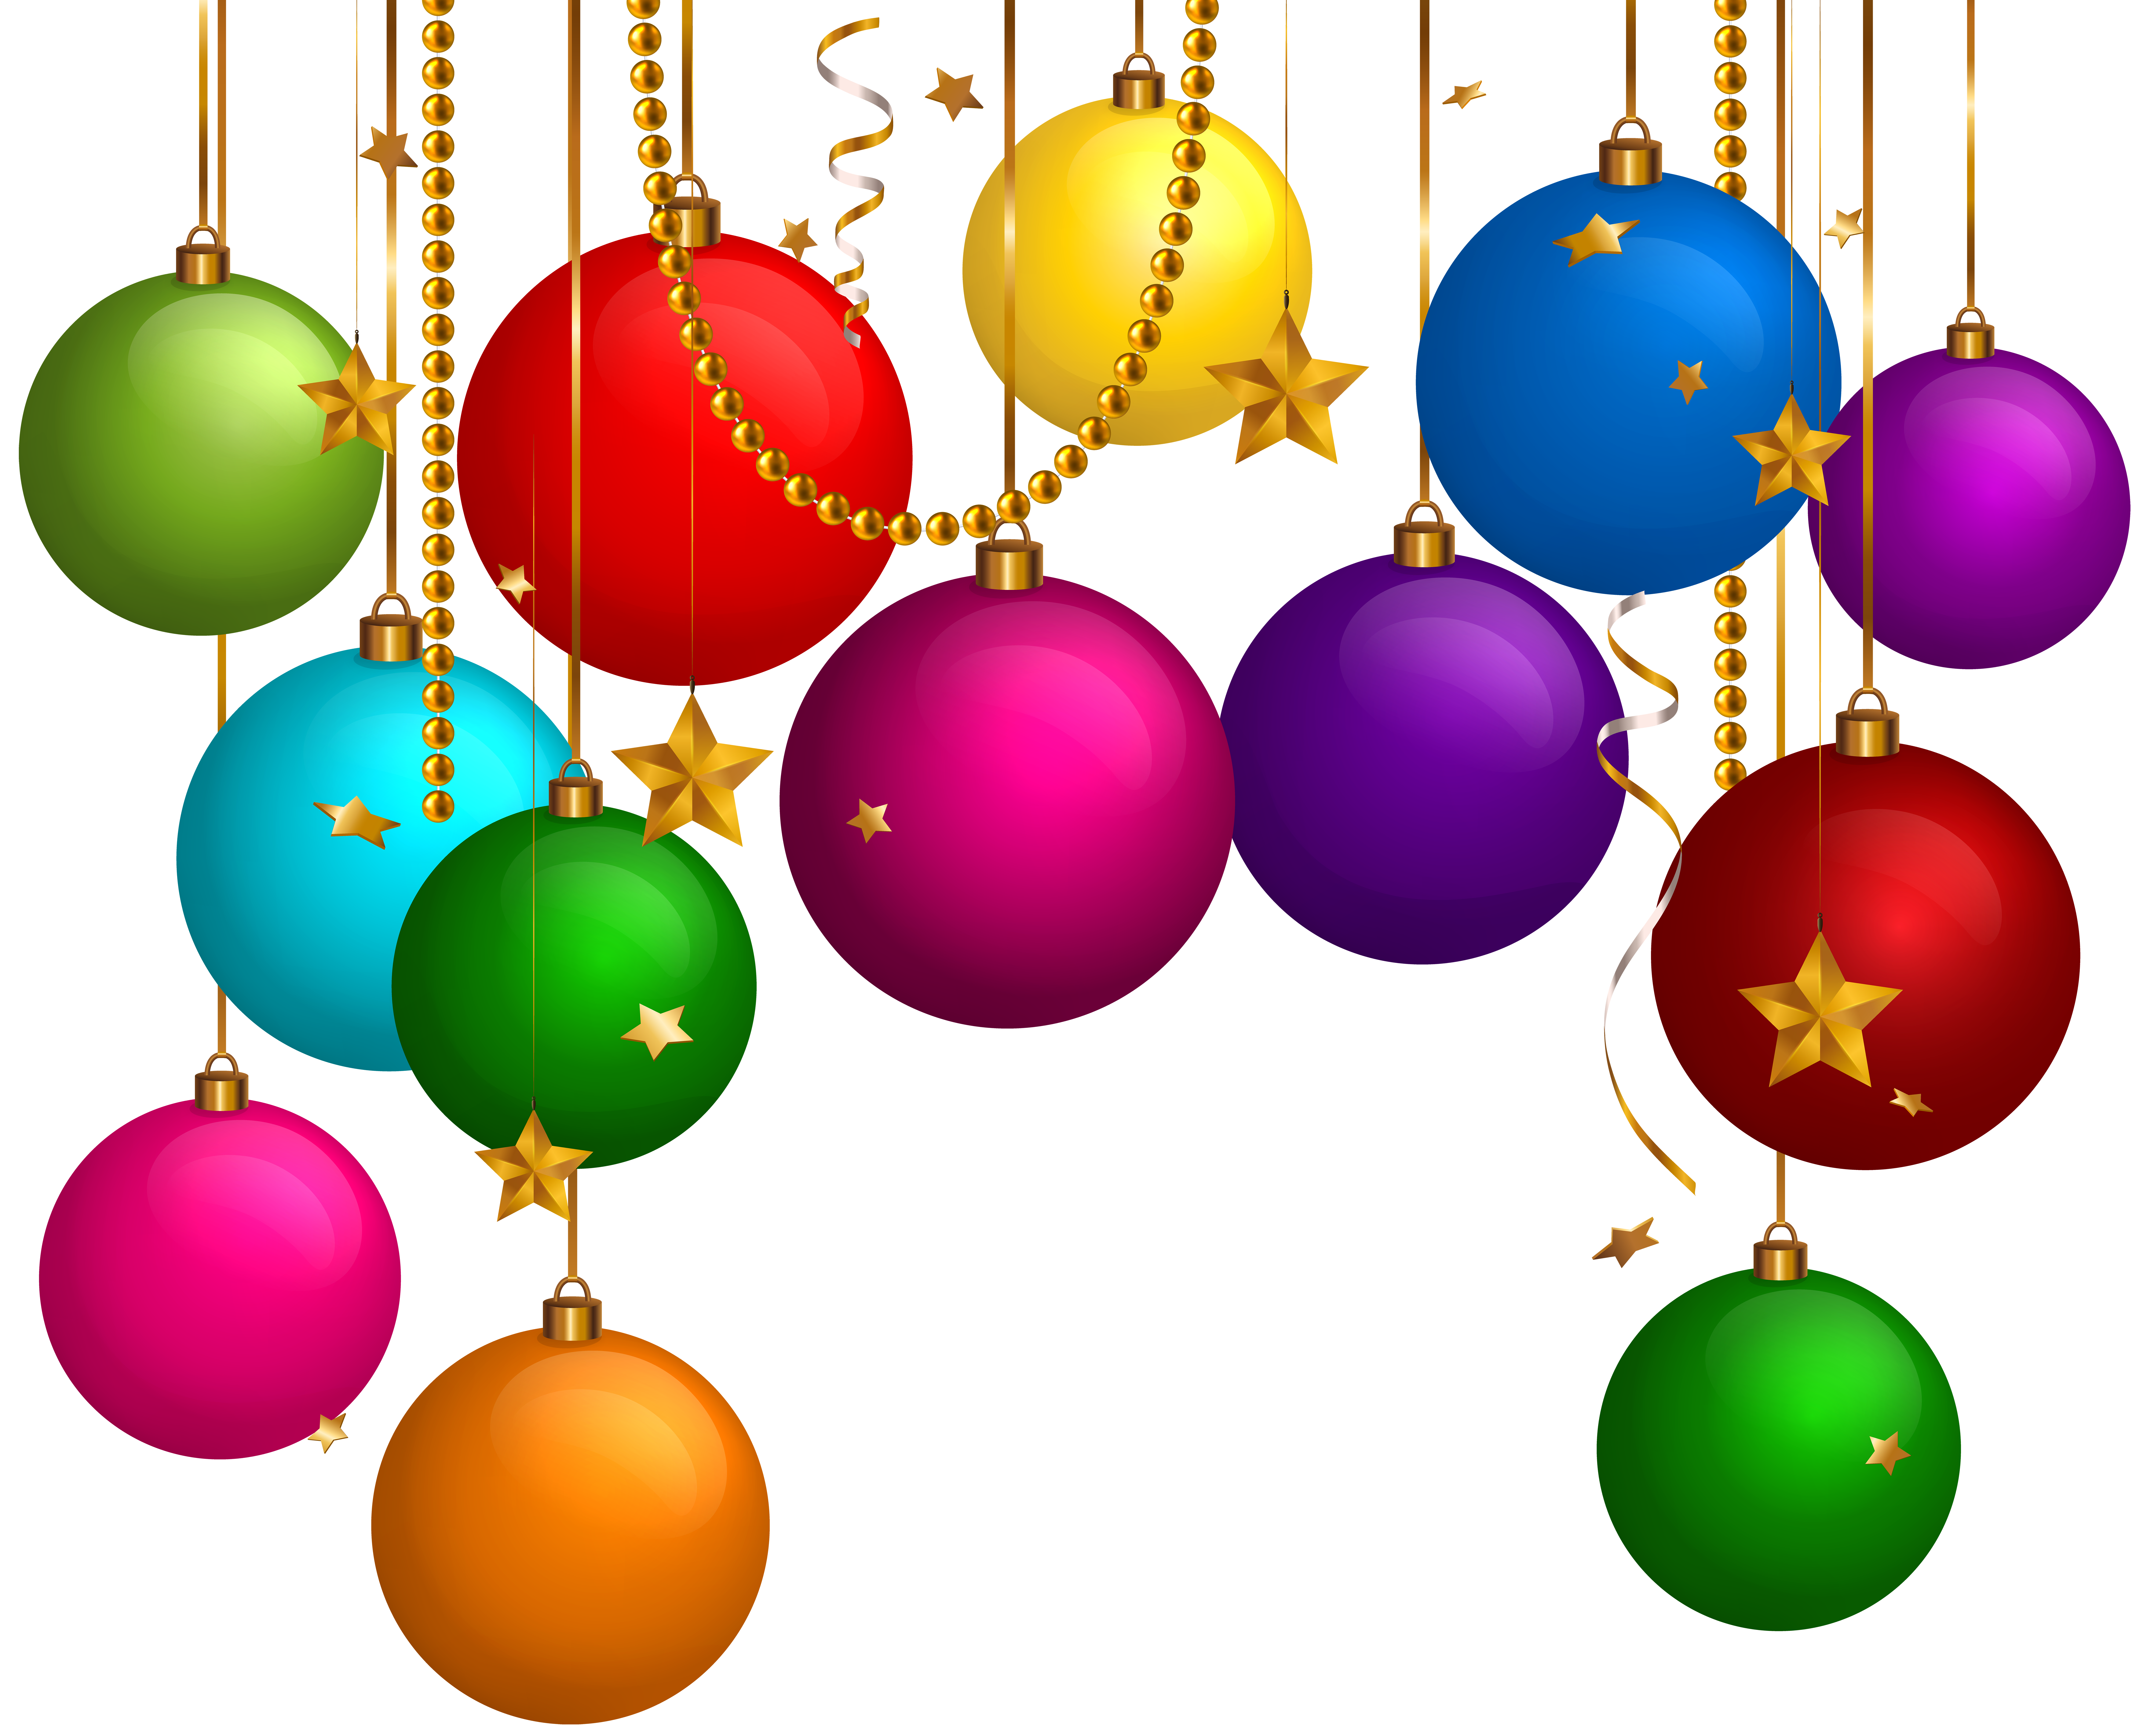 Hanging Christmas Balls Decor Png Clip Art Gallery Yopriceville High Quality Images And